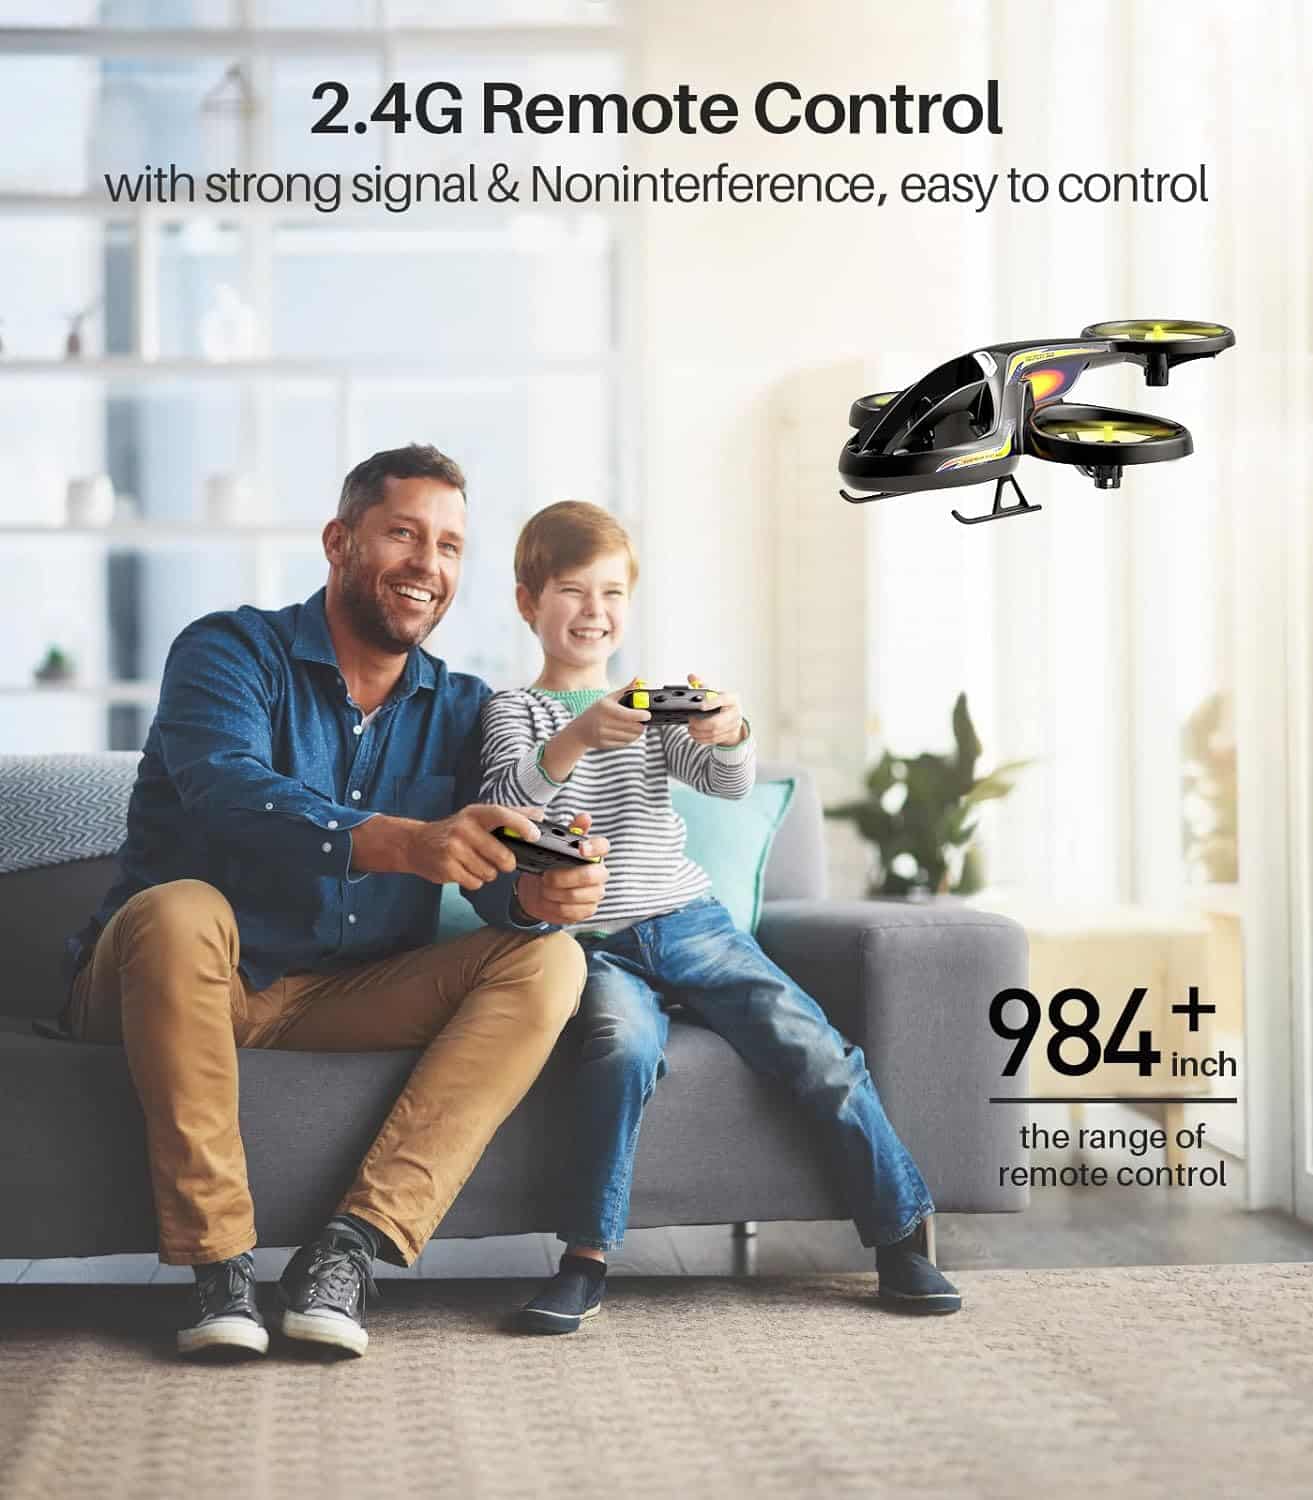 SYMA RC Helicopter: The Latest Remote Control Drone Toy that's Taking the World by Storm!